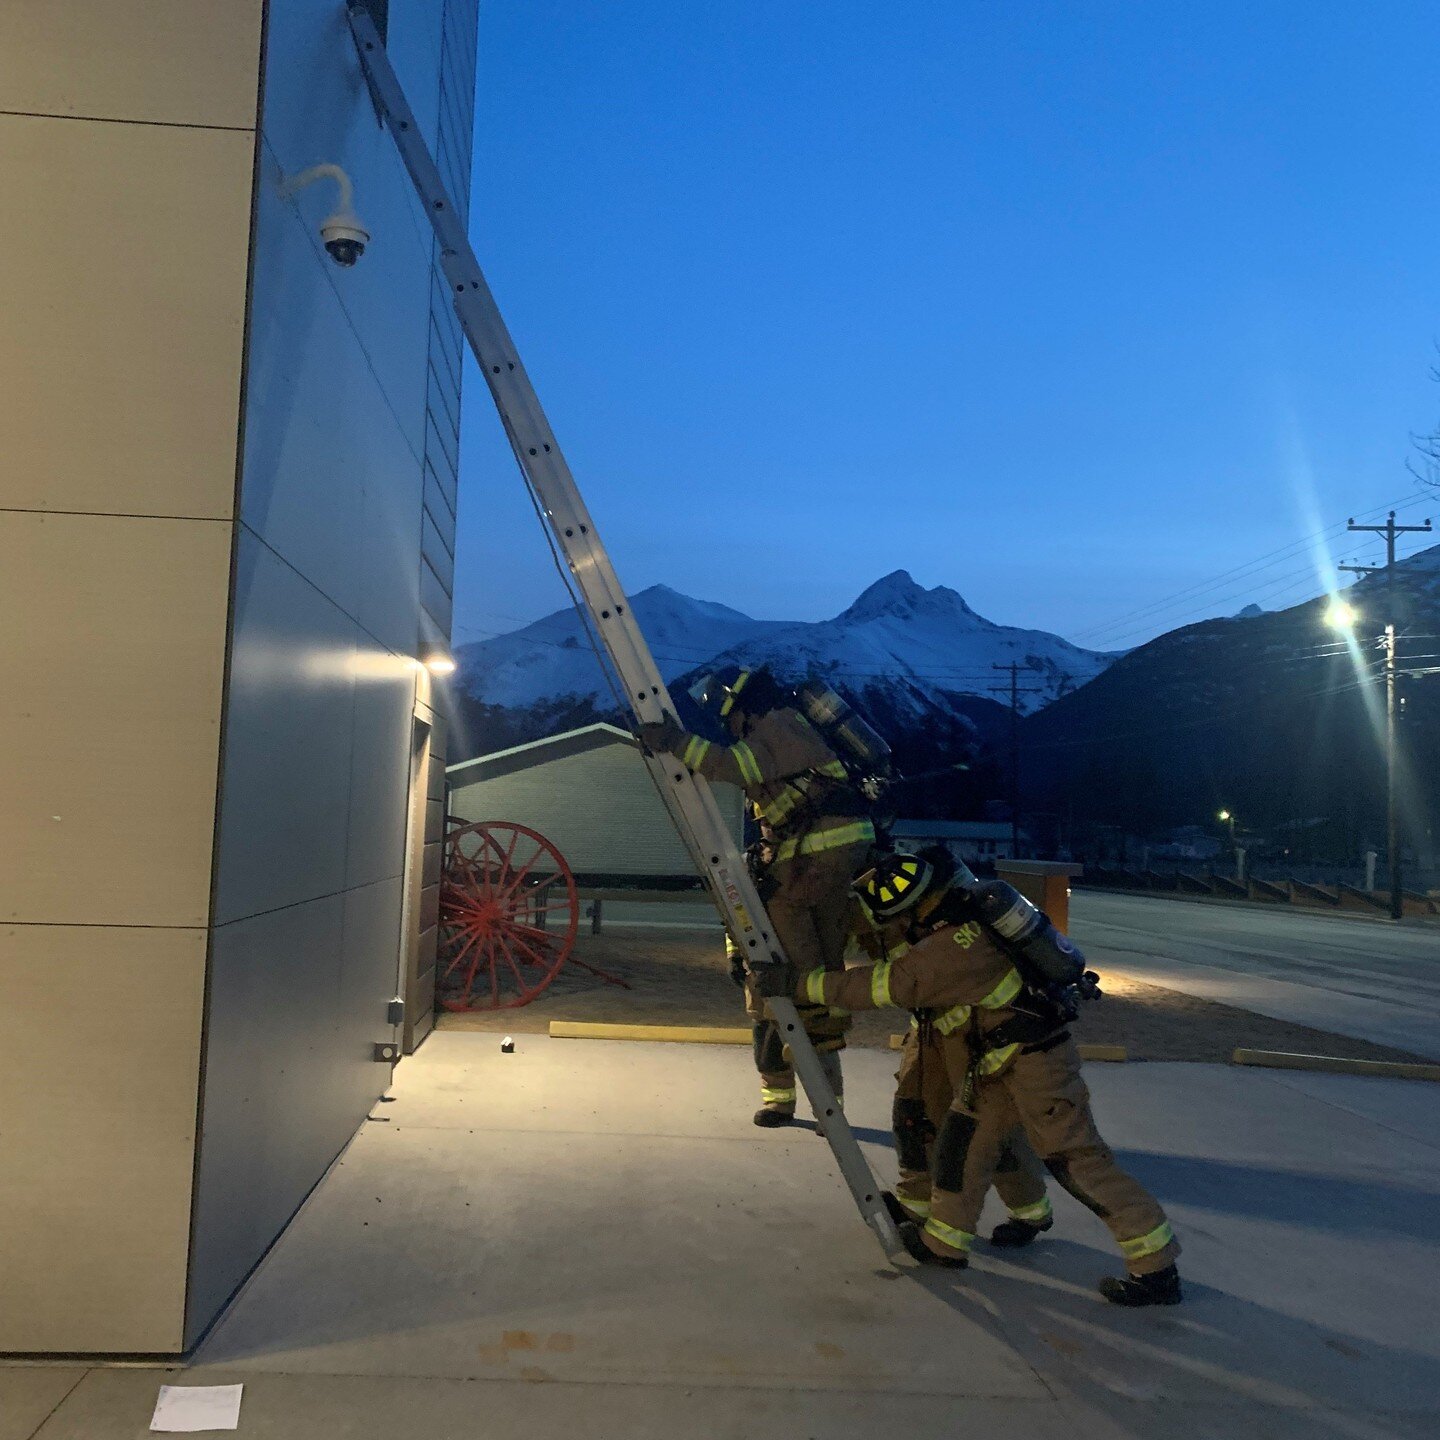 &quot;There is nothing impossible to they who will try.&quot; ~Alexander the Great

Skagway, Alaska Firefighter crews working on ladder skills at 2130, with a gorgeous view in the background. 

#firefighter1 #firetraining #fireservice #truckops #ladd